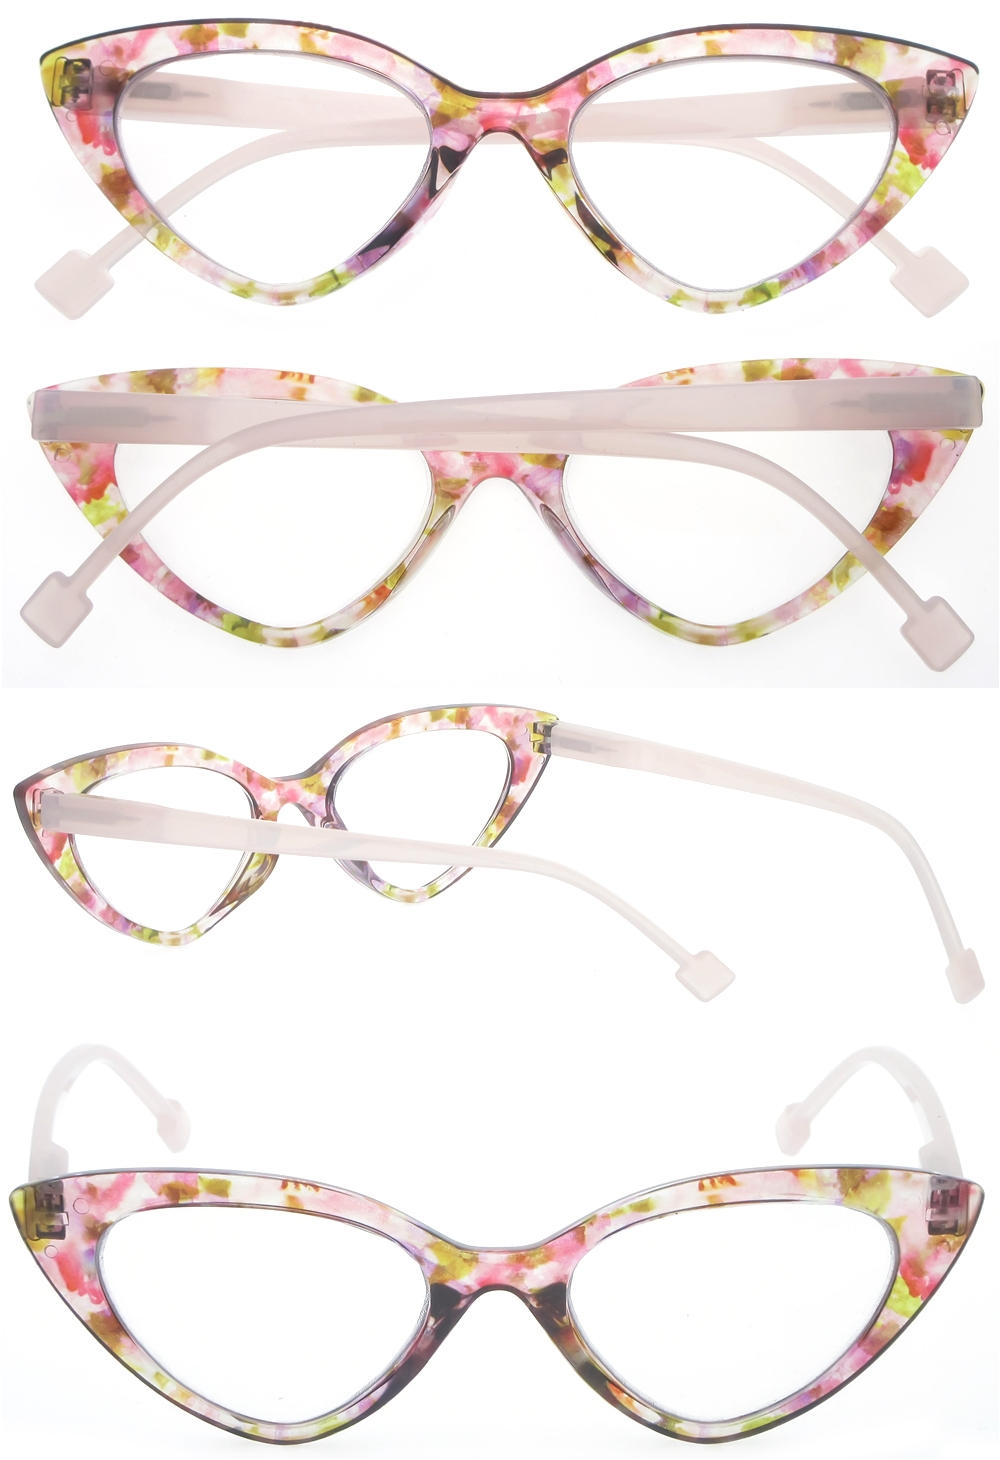 Dachuan Optical DRP131126 China Wholesale Trendy Colorful Plastic Reading Glasses with Cateye Shape (5)